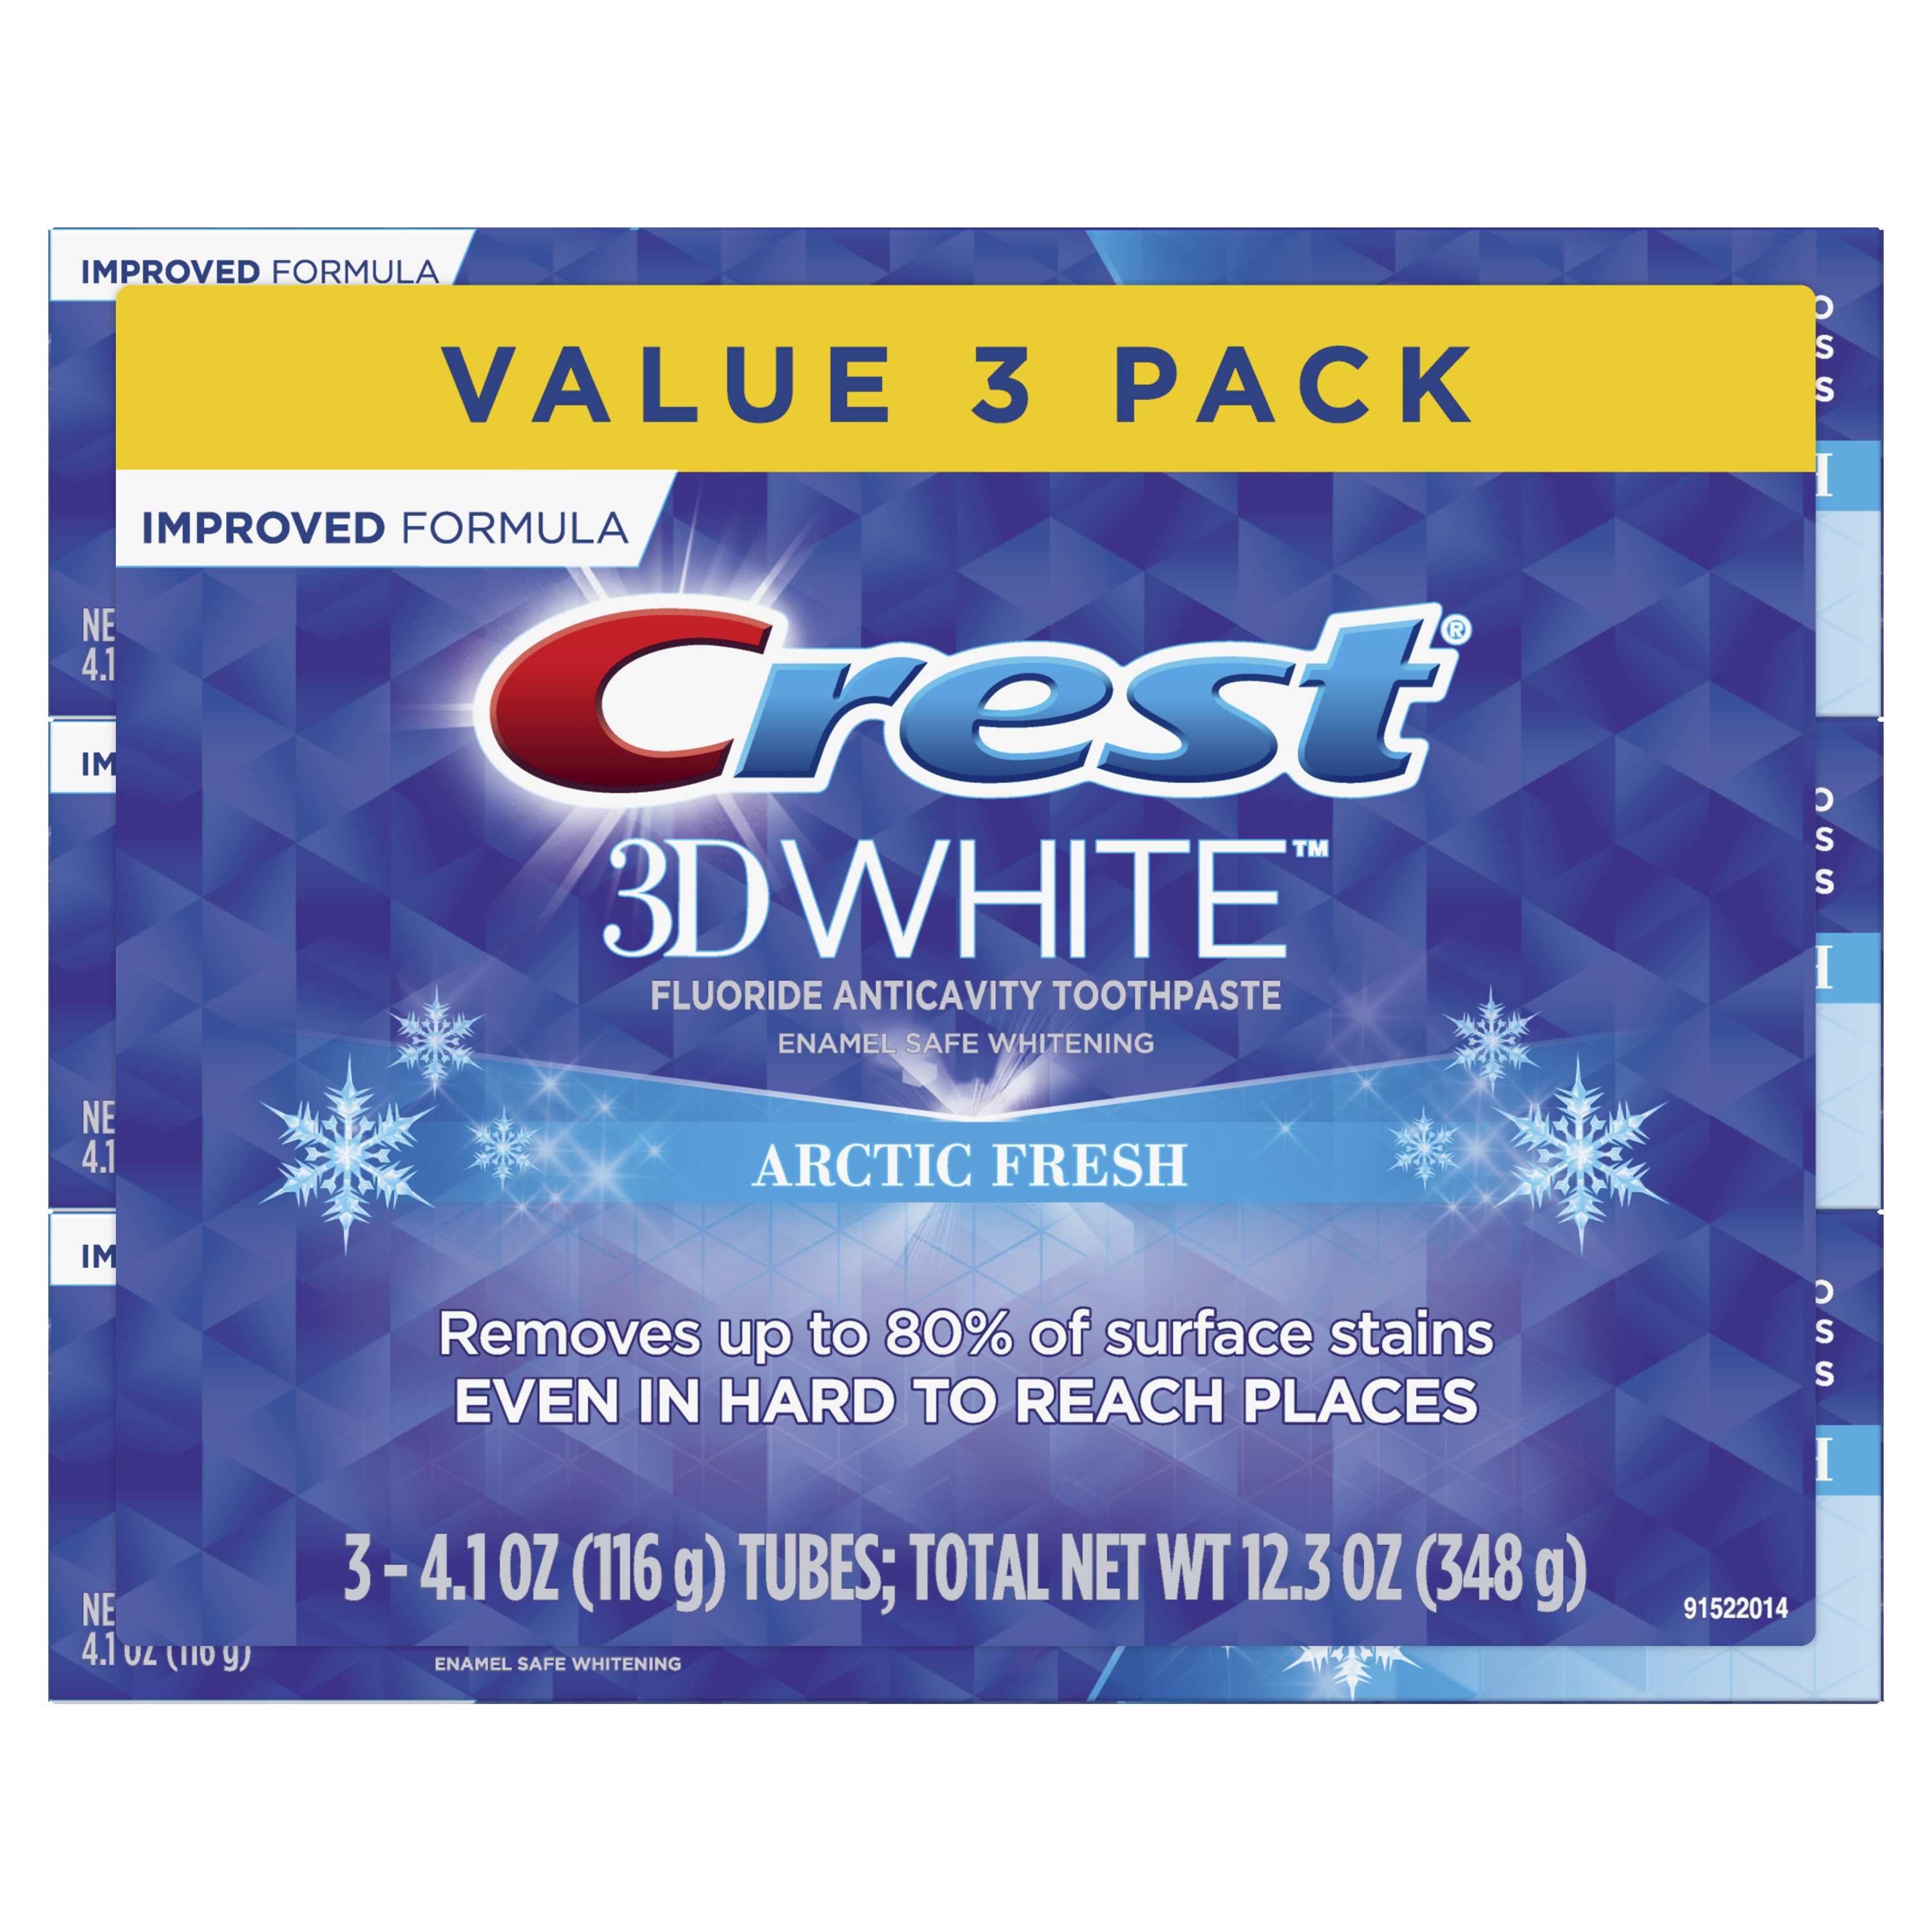 Crest 3D White, Whitening Toothpaste Arctic Fresh, 4.1 oz, Pack of 3 - image 1 of 8